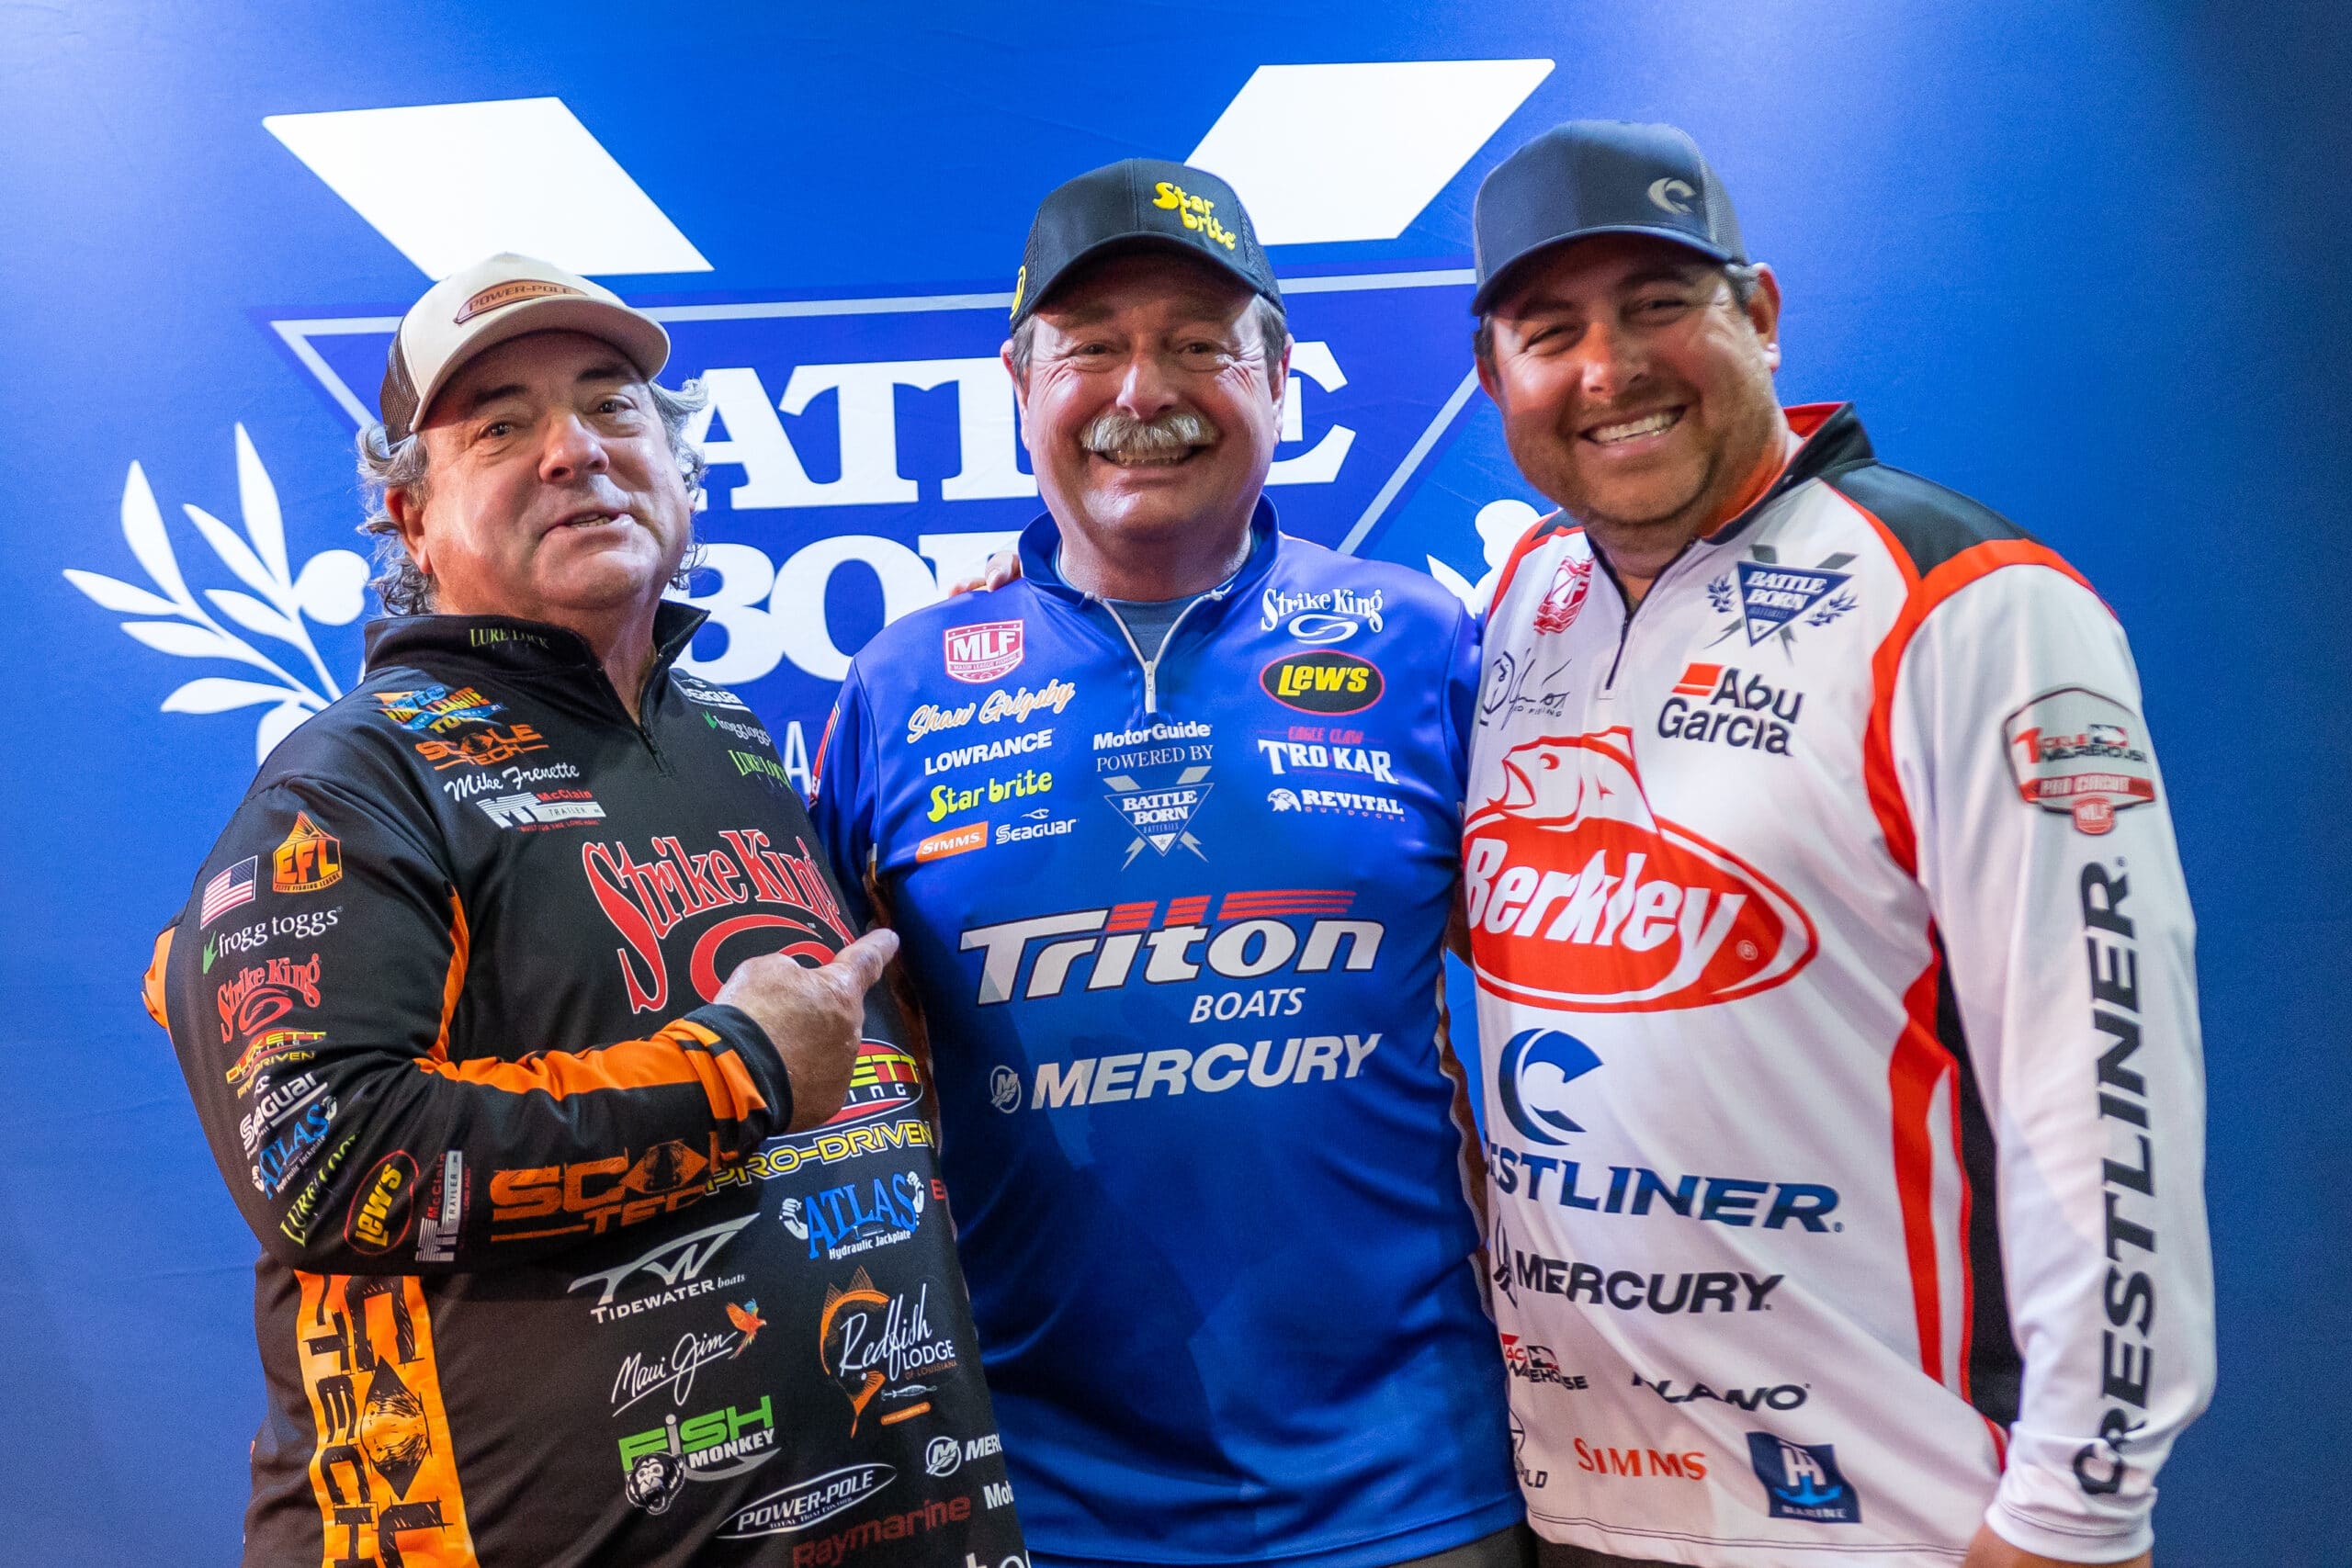 Shaw Grigsby, Mike Frenette, and John Cox at Battle Born Batteries Booth